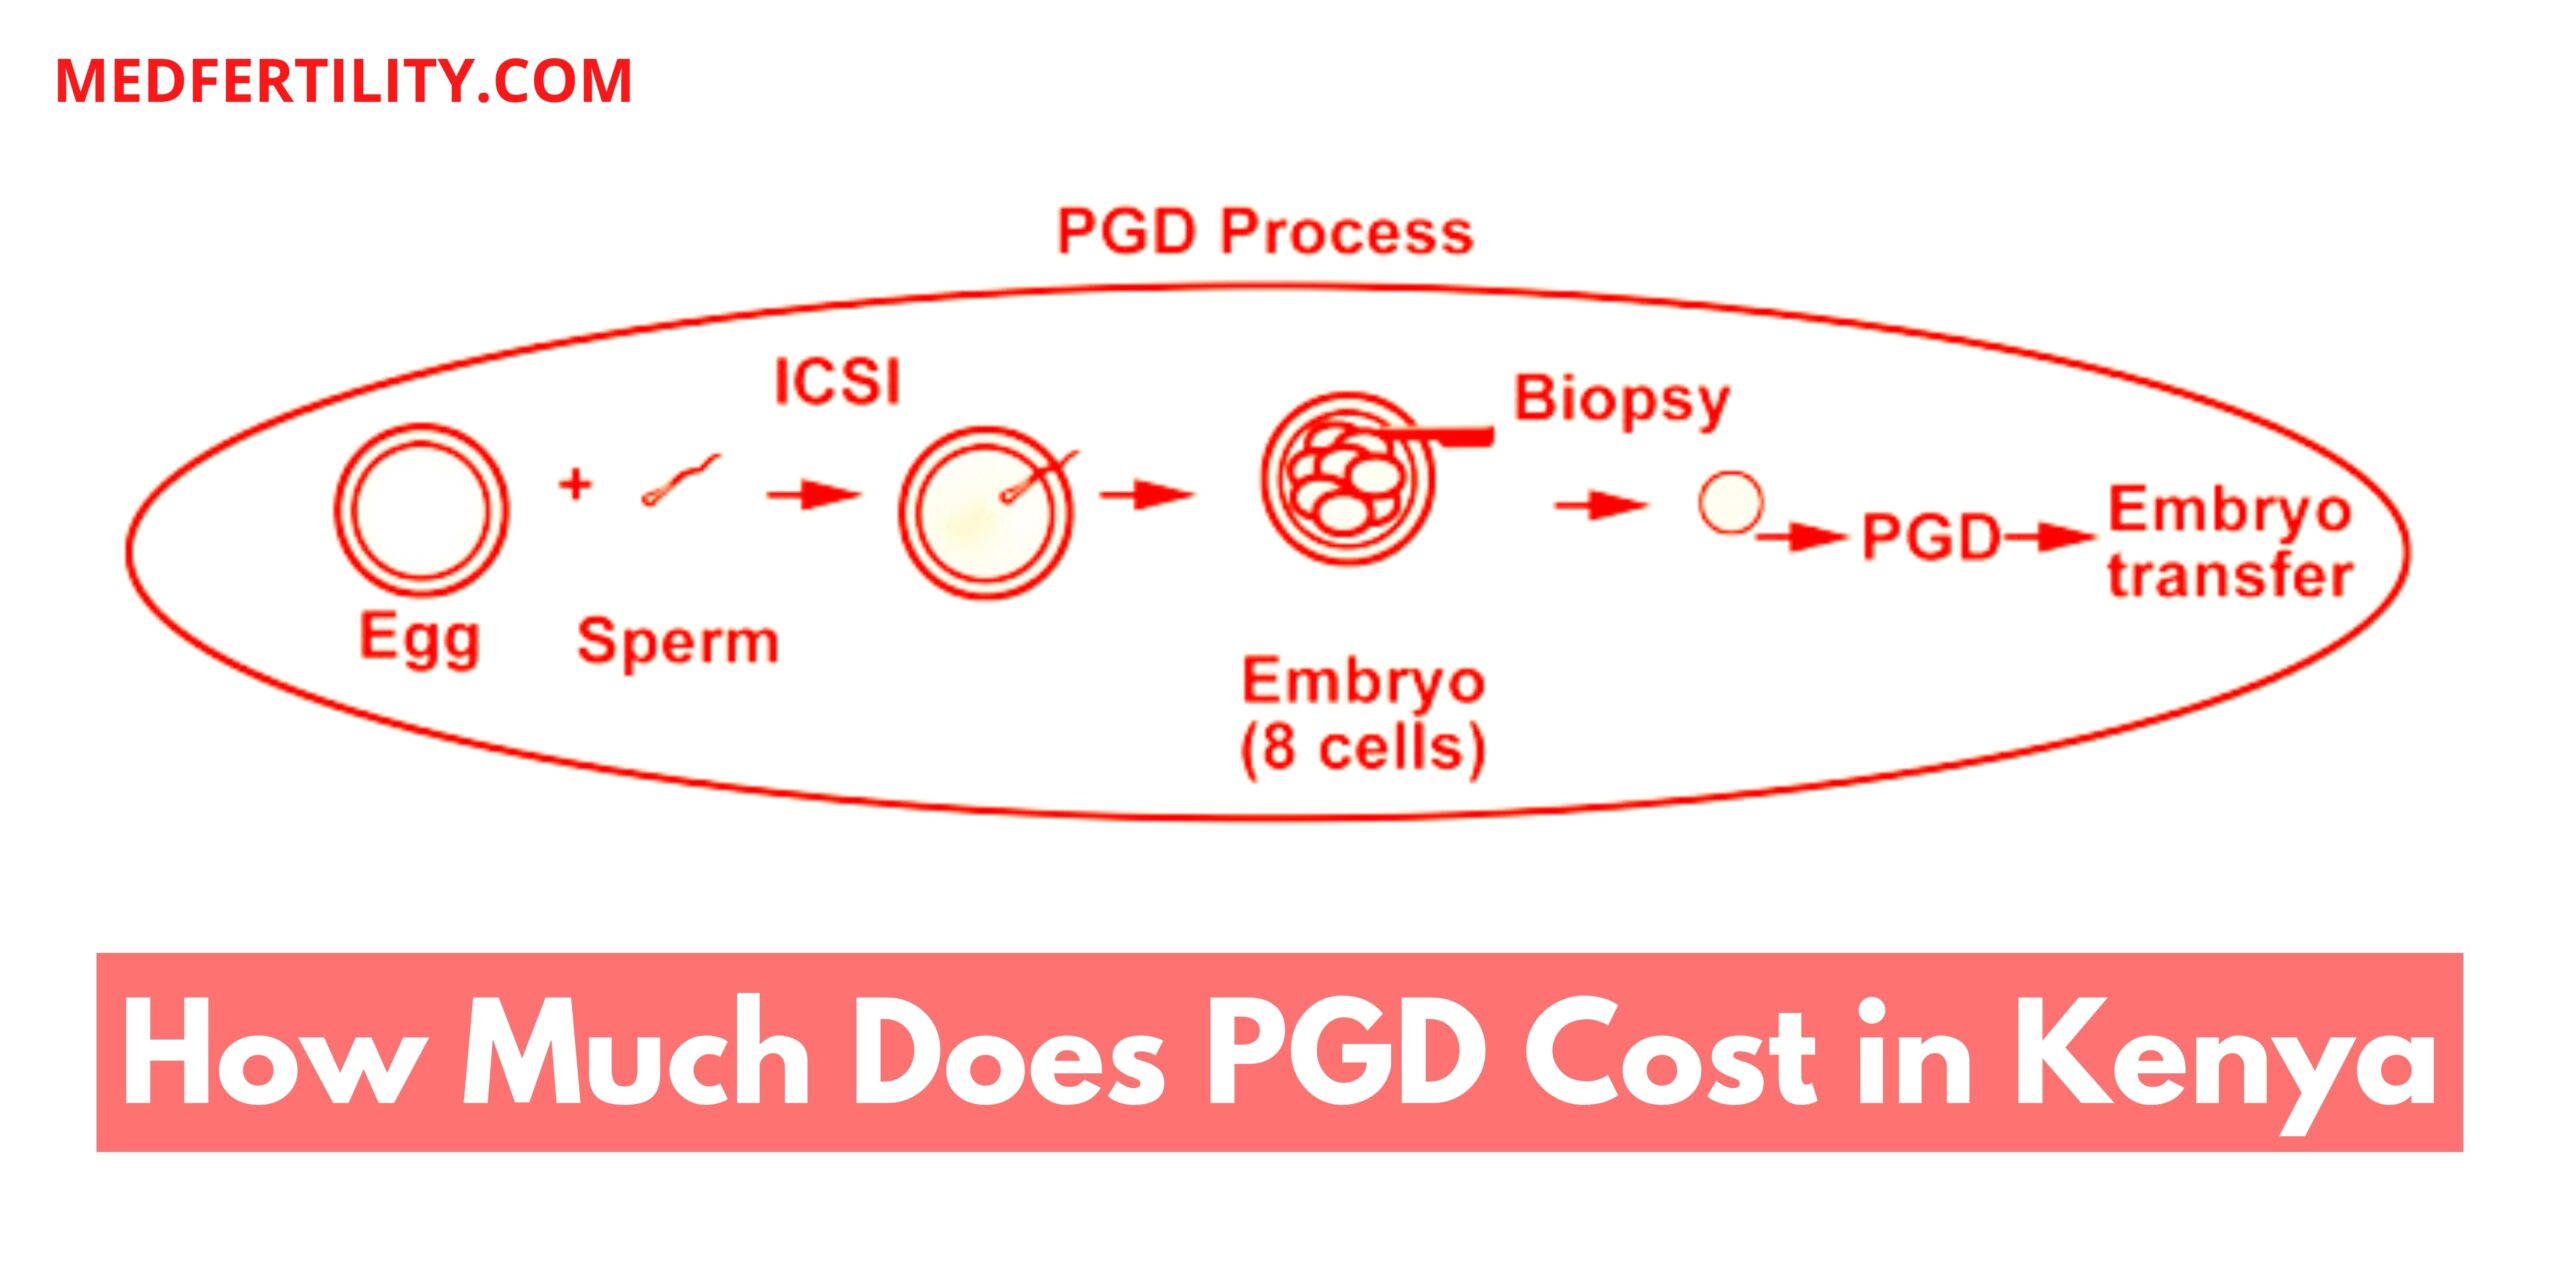 How Much Does PGD Cost in Kenya